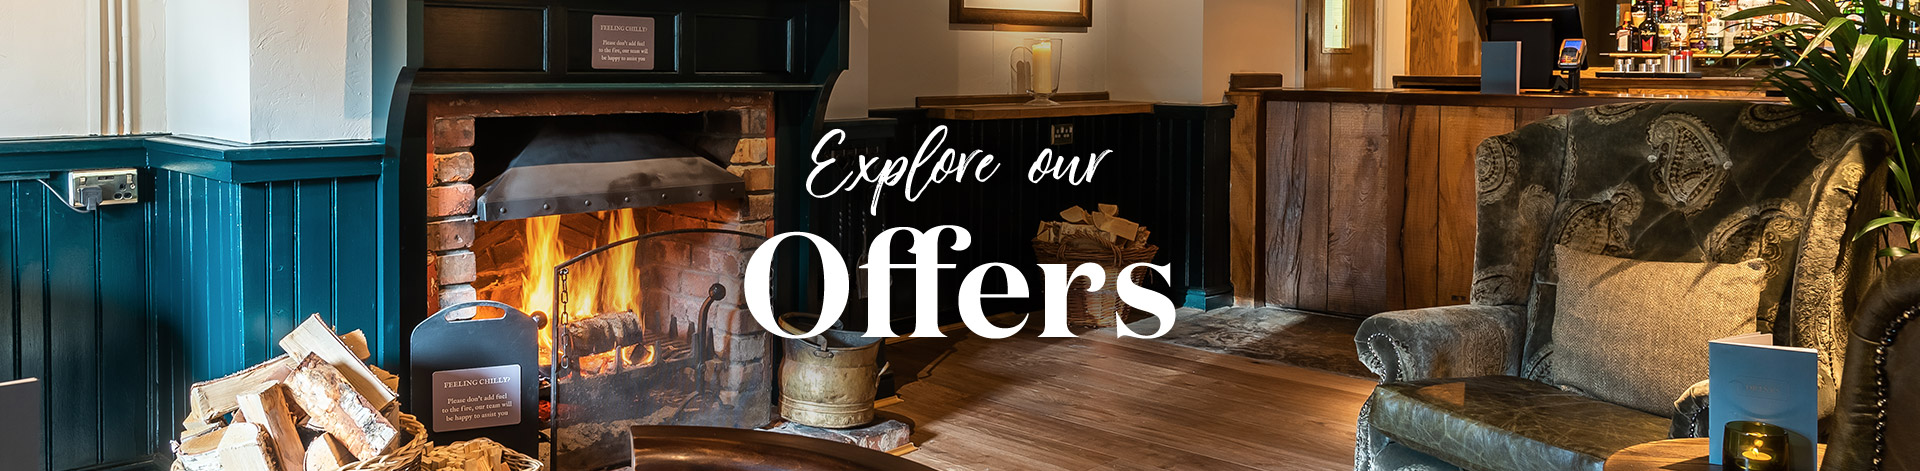 Our latest offers at The New Mill